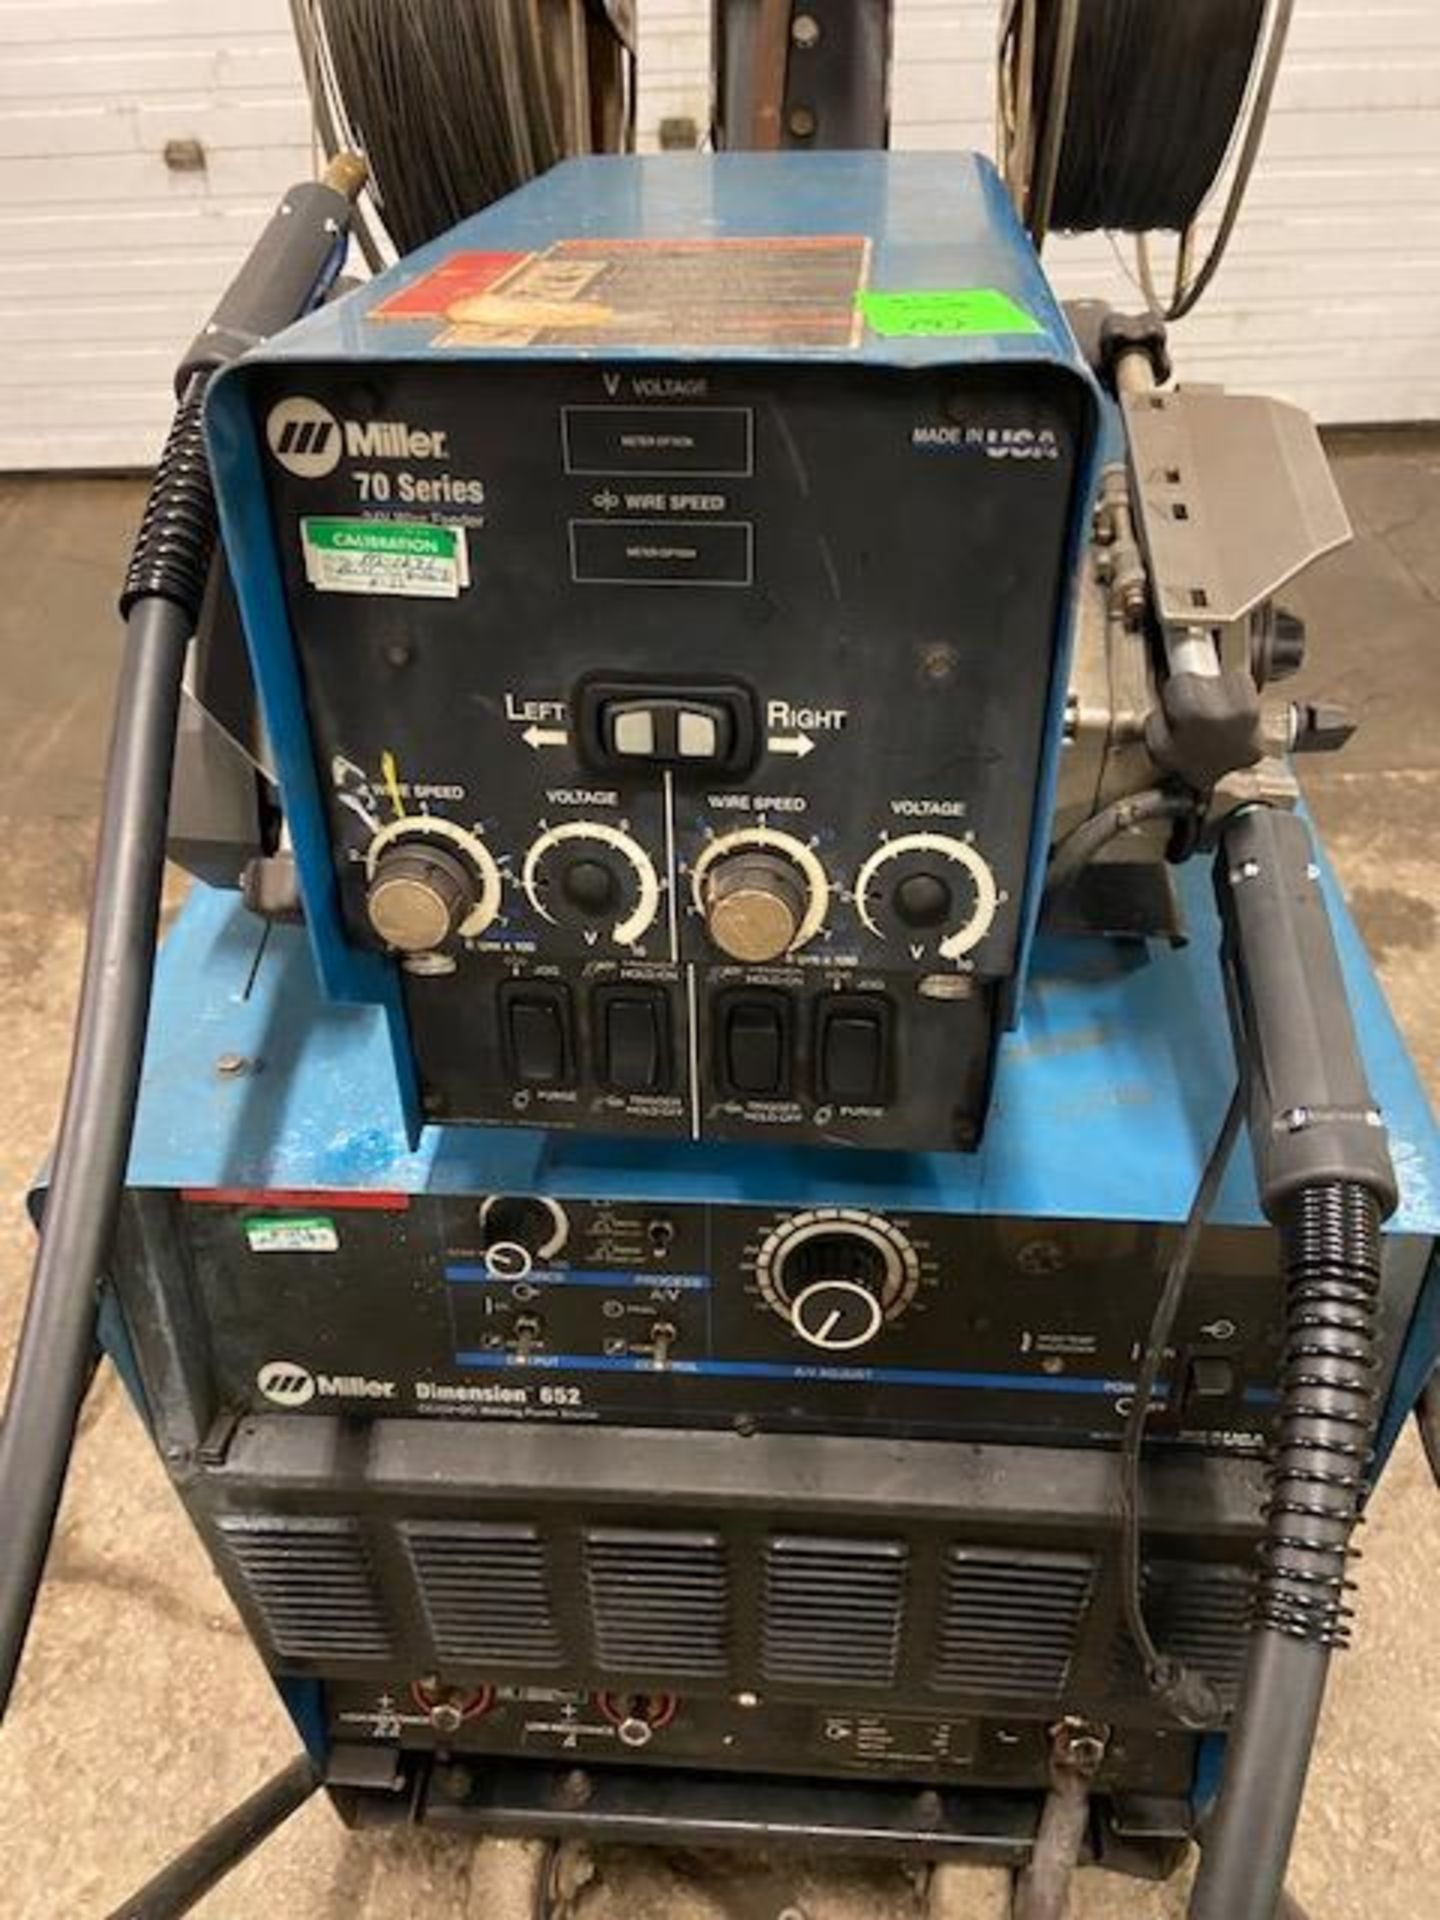 Miller Dimension 652 Mig Welder 650 Amp Mig Tig Stick with DUAL 70 Series Wire Feeder with 2 Mig - Image 2 of 2